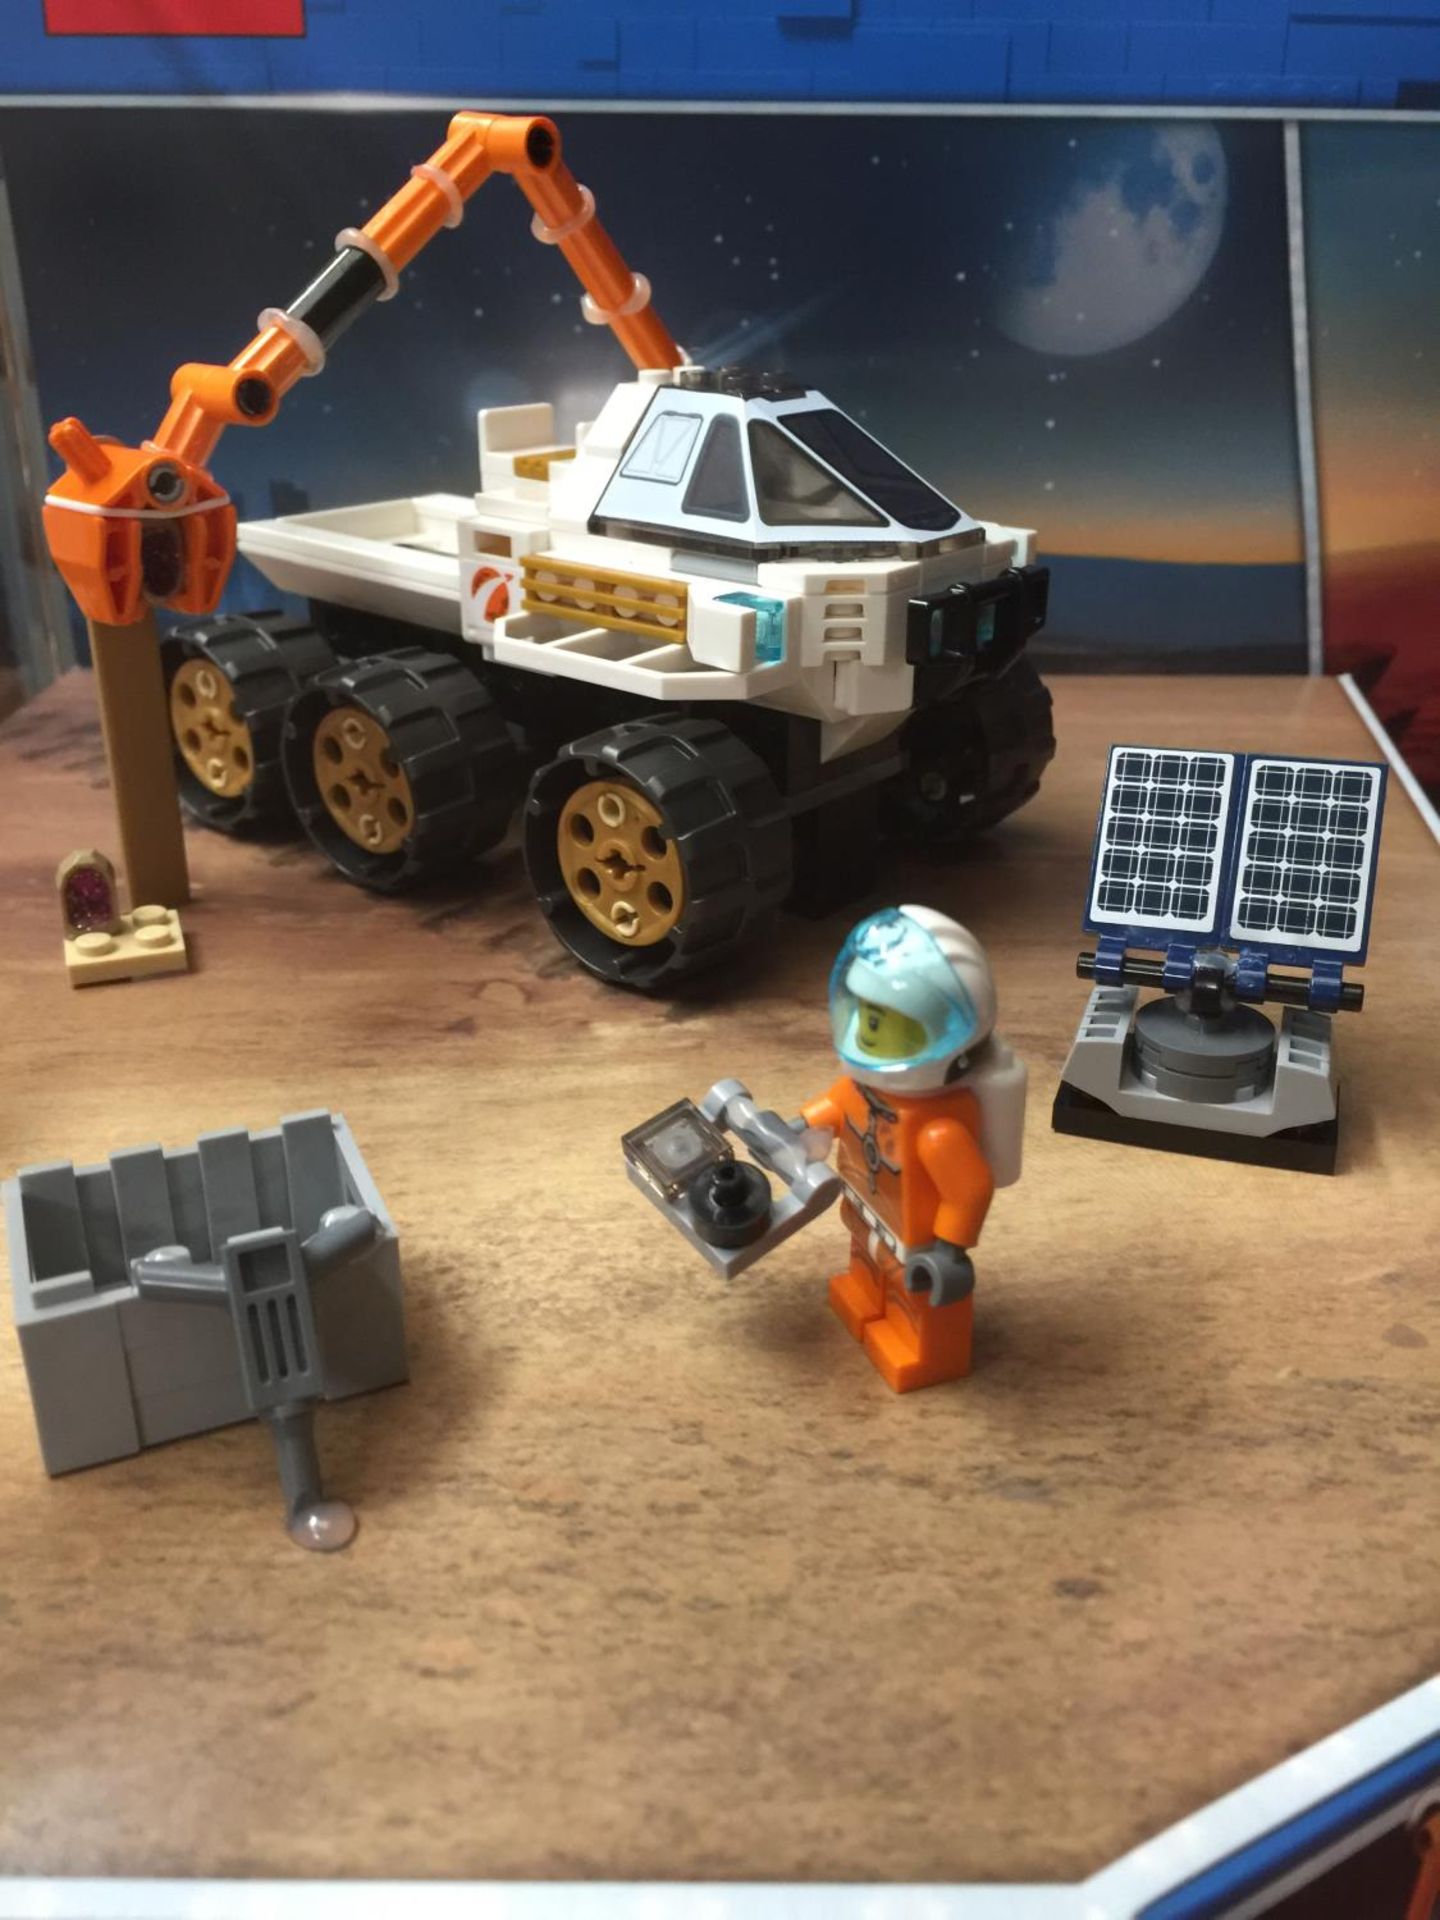 A LEGO CITY KIT NO. 60226, MARS EXPLORATION, BUILT AND IN DISPLAY CASE - Image 6 of 7